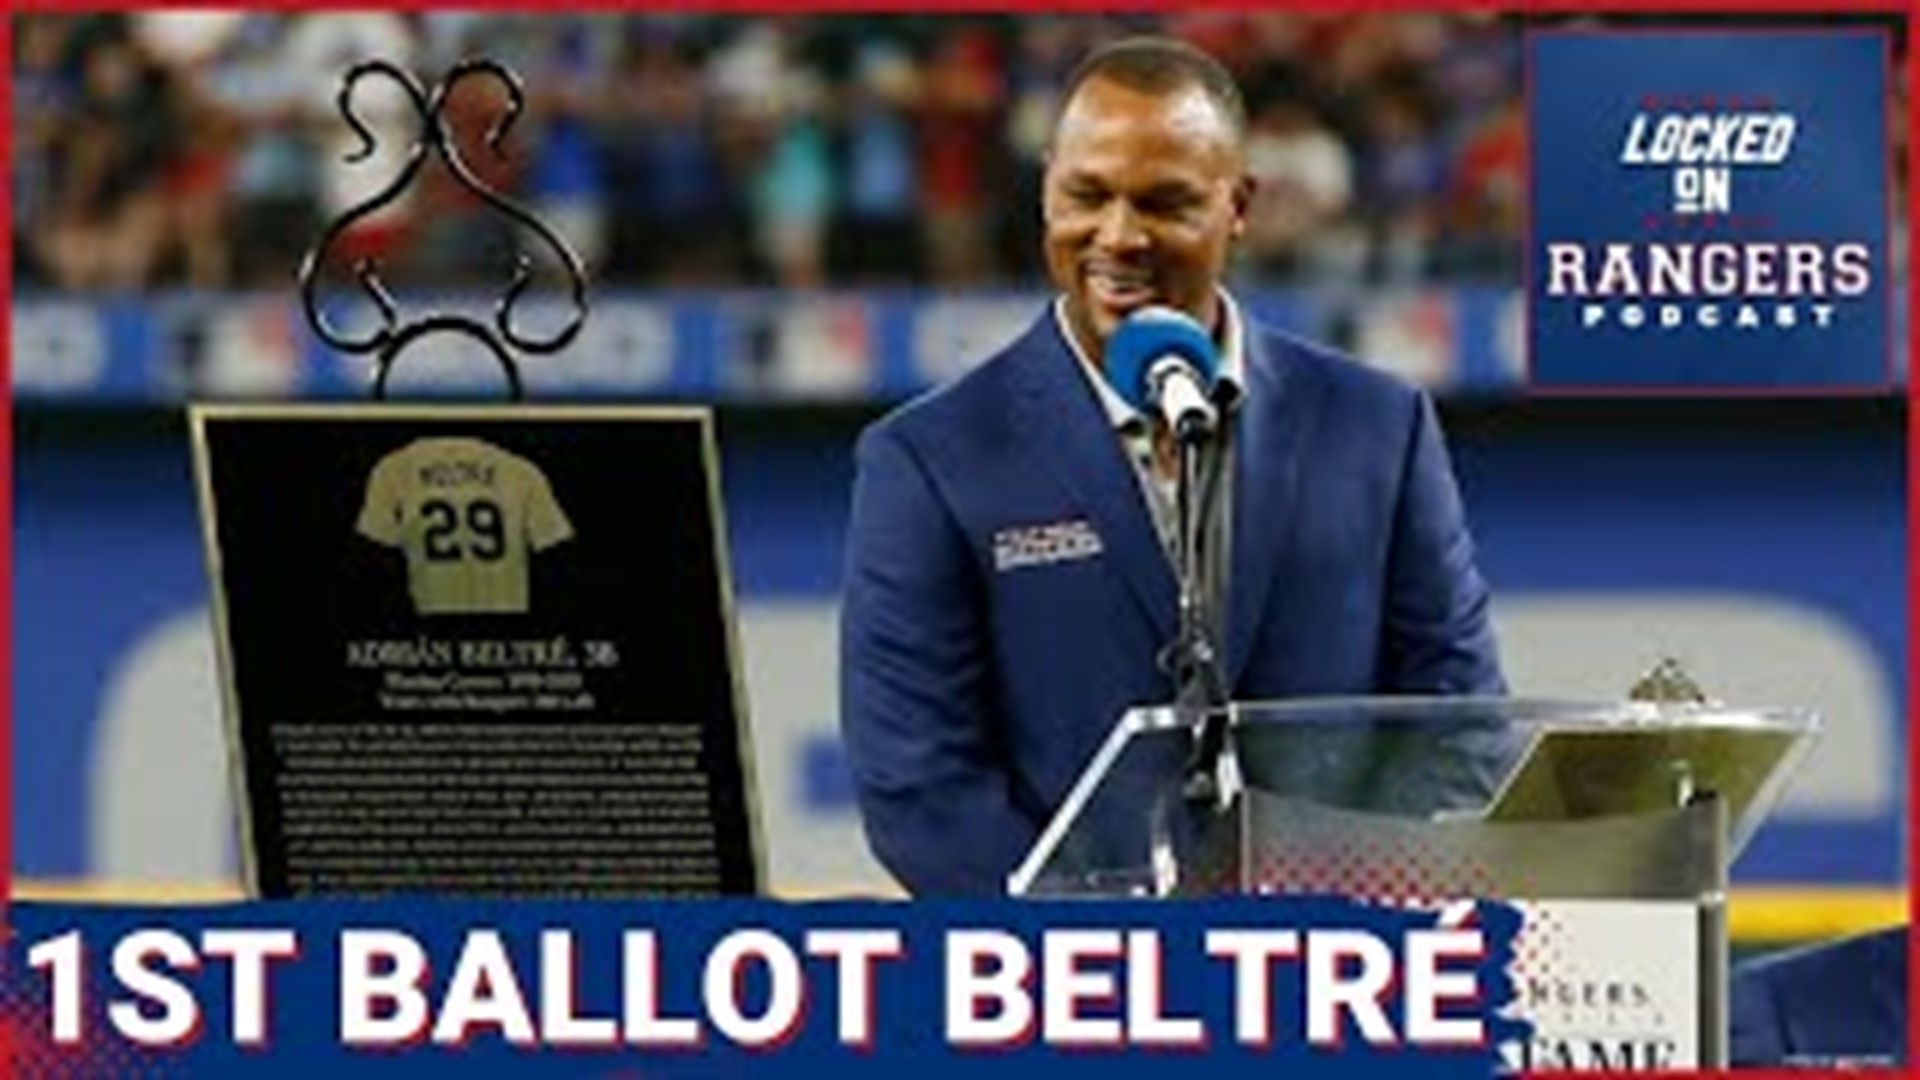 Texas Rangers legend Adrian Beltre is on the Hall of Fame ballot for the first time and should be unanimously inducted as one of the greatest players in MLB history.